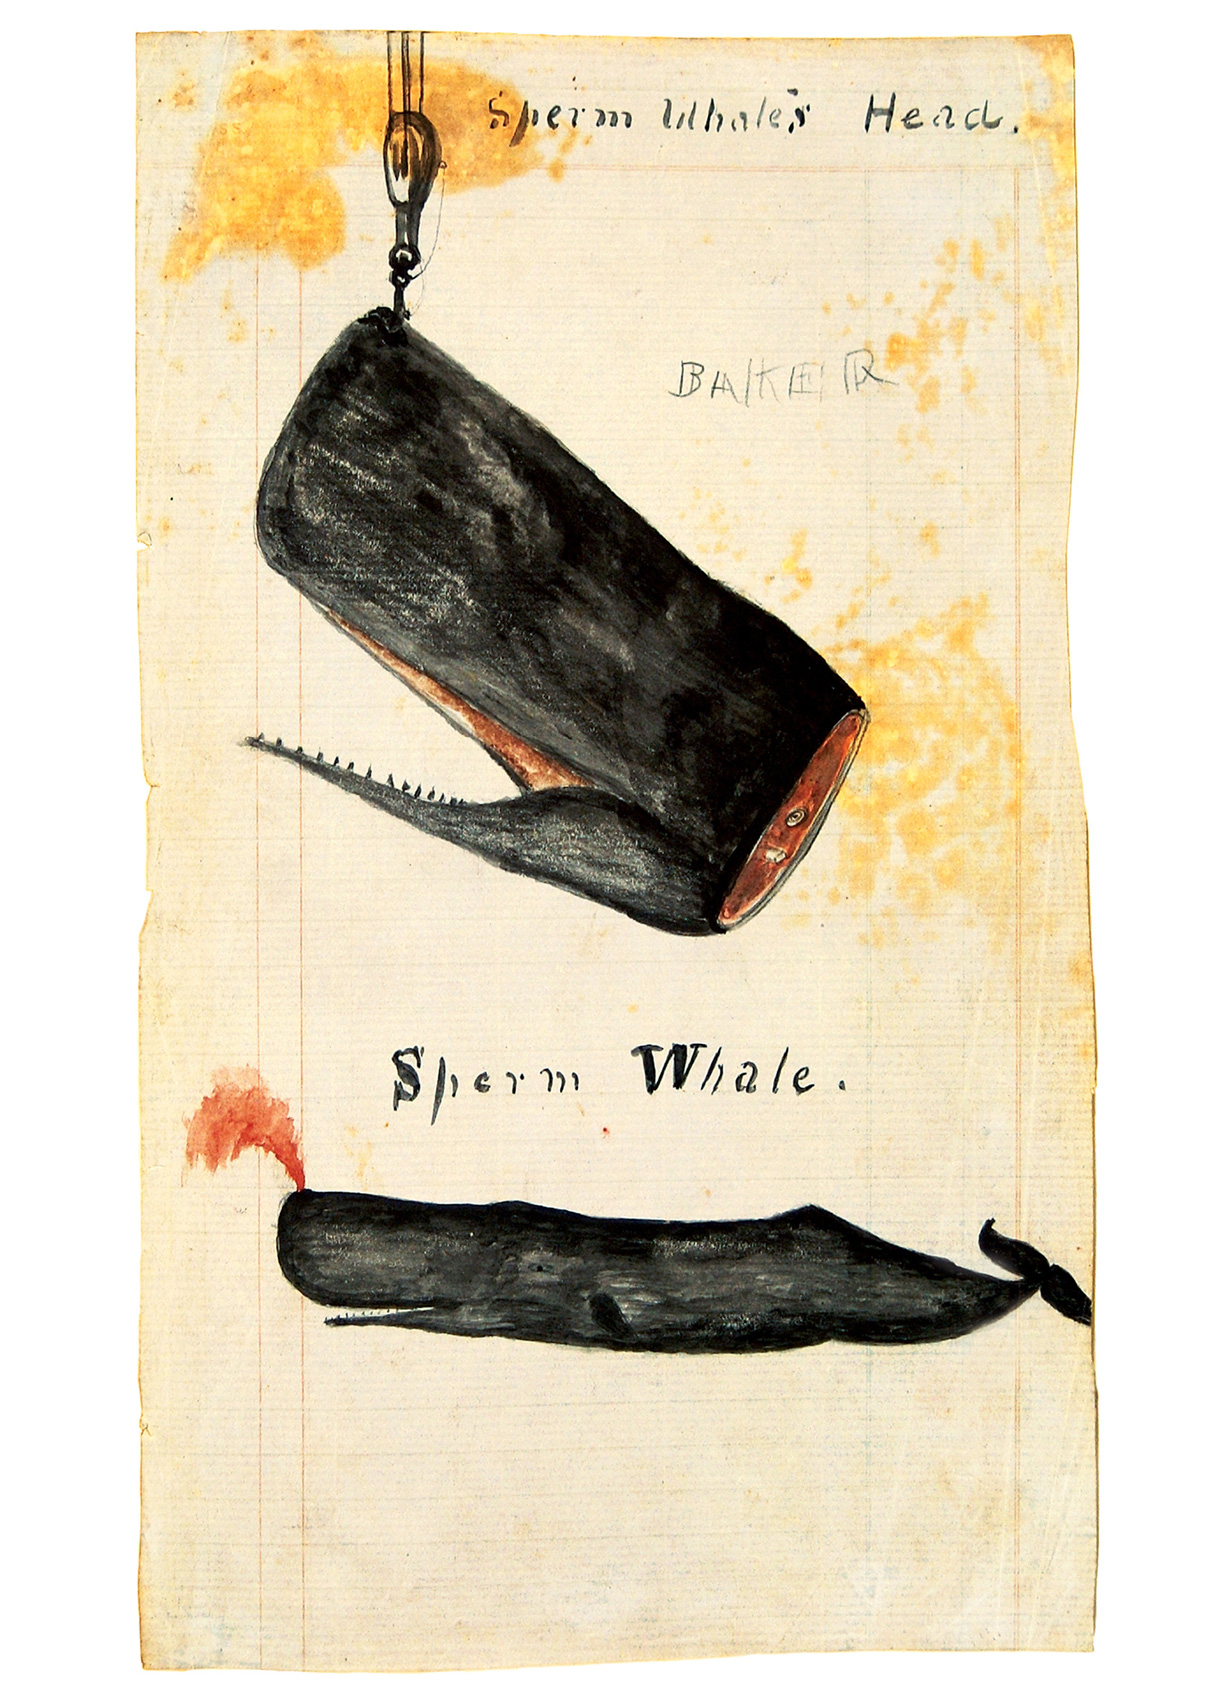 A drawing of a whale’s head being hoisted upward, from the journal of Rodolphus W. Dexter, kept aboard the bark 